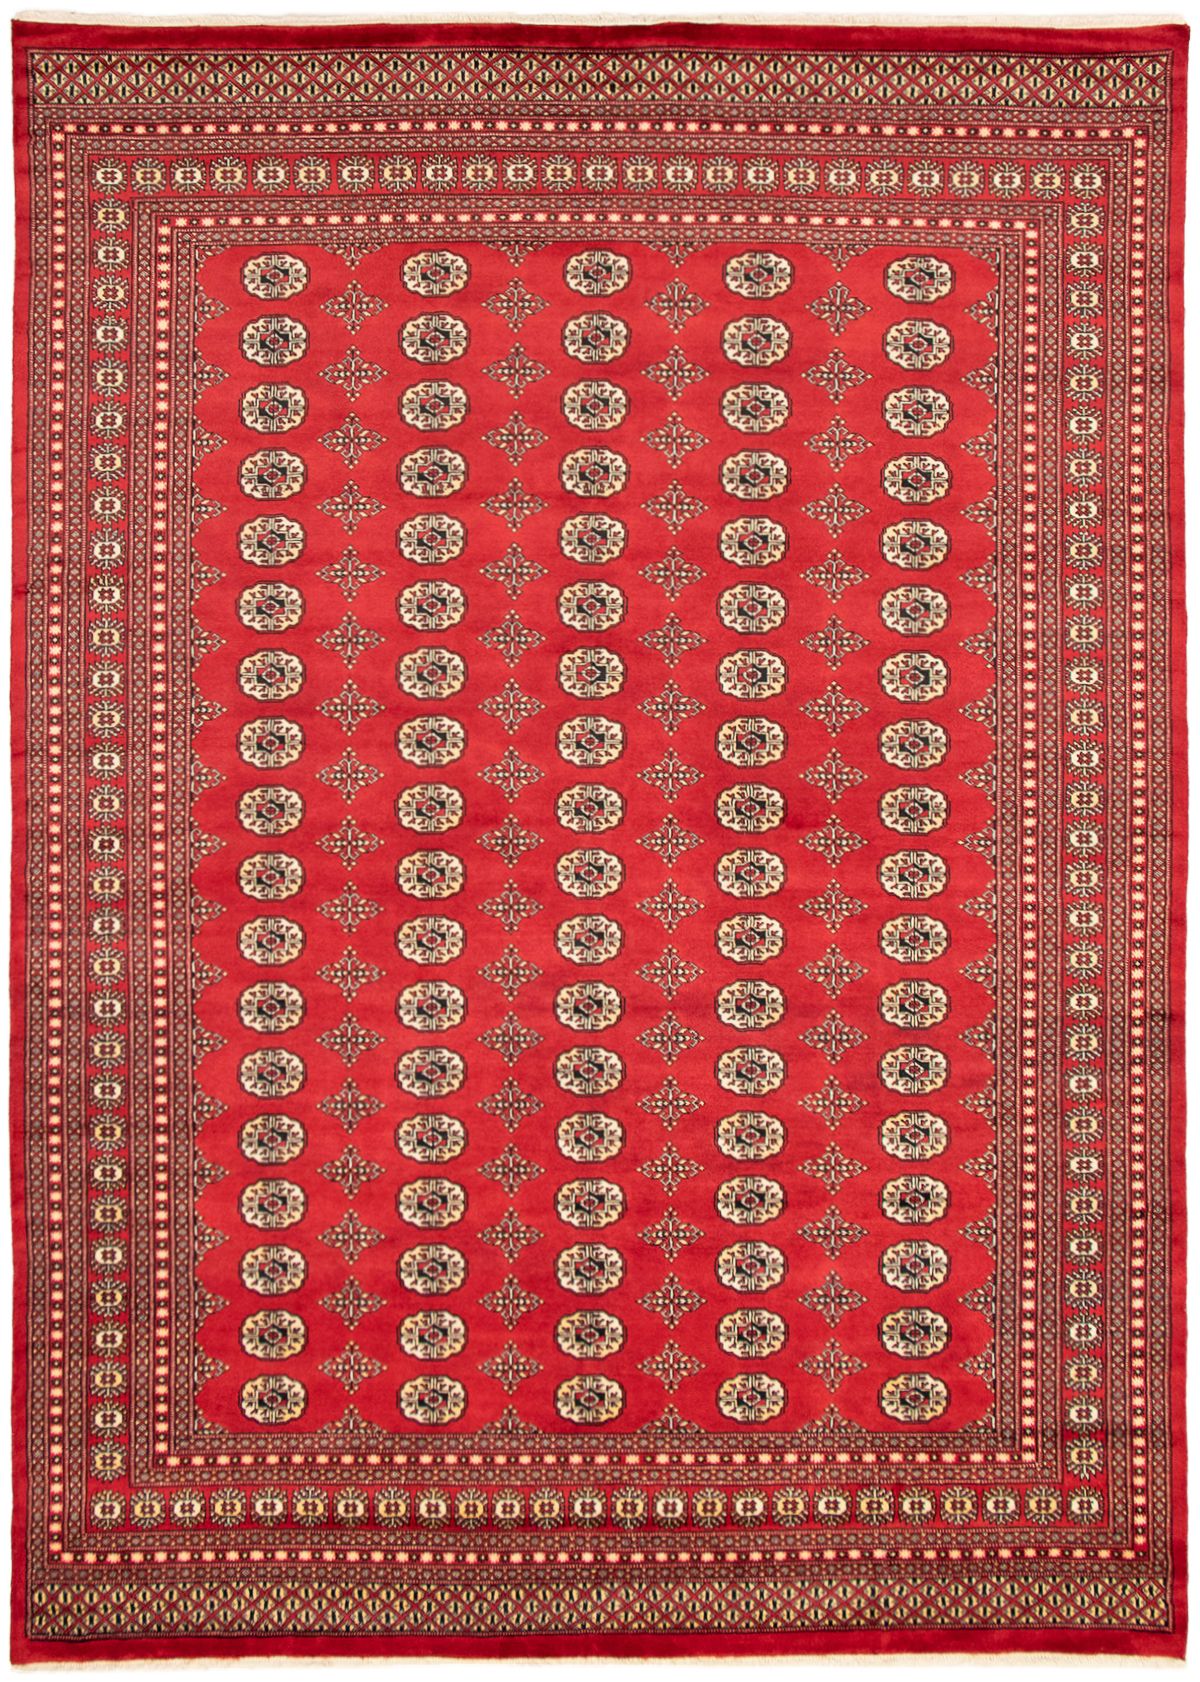 Hand-knotted Finest Peshawar Bokhara Red Wool Rug 8'2" x 9'8" Size: 8'2" x 9'8"  